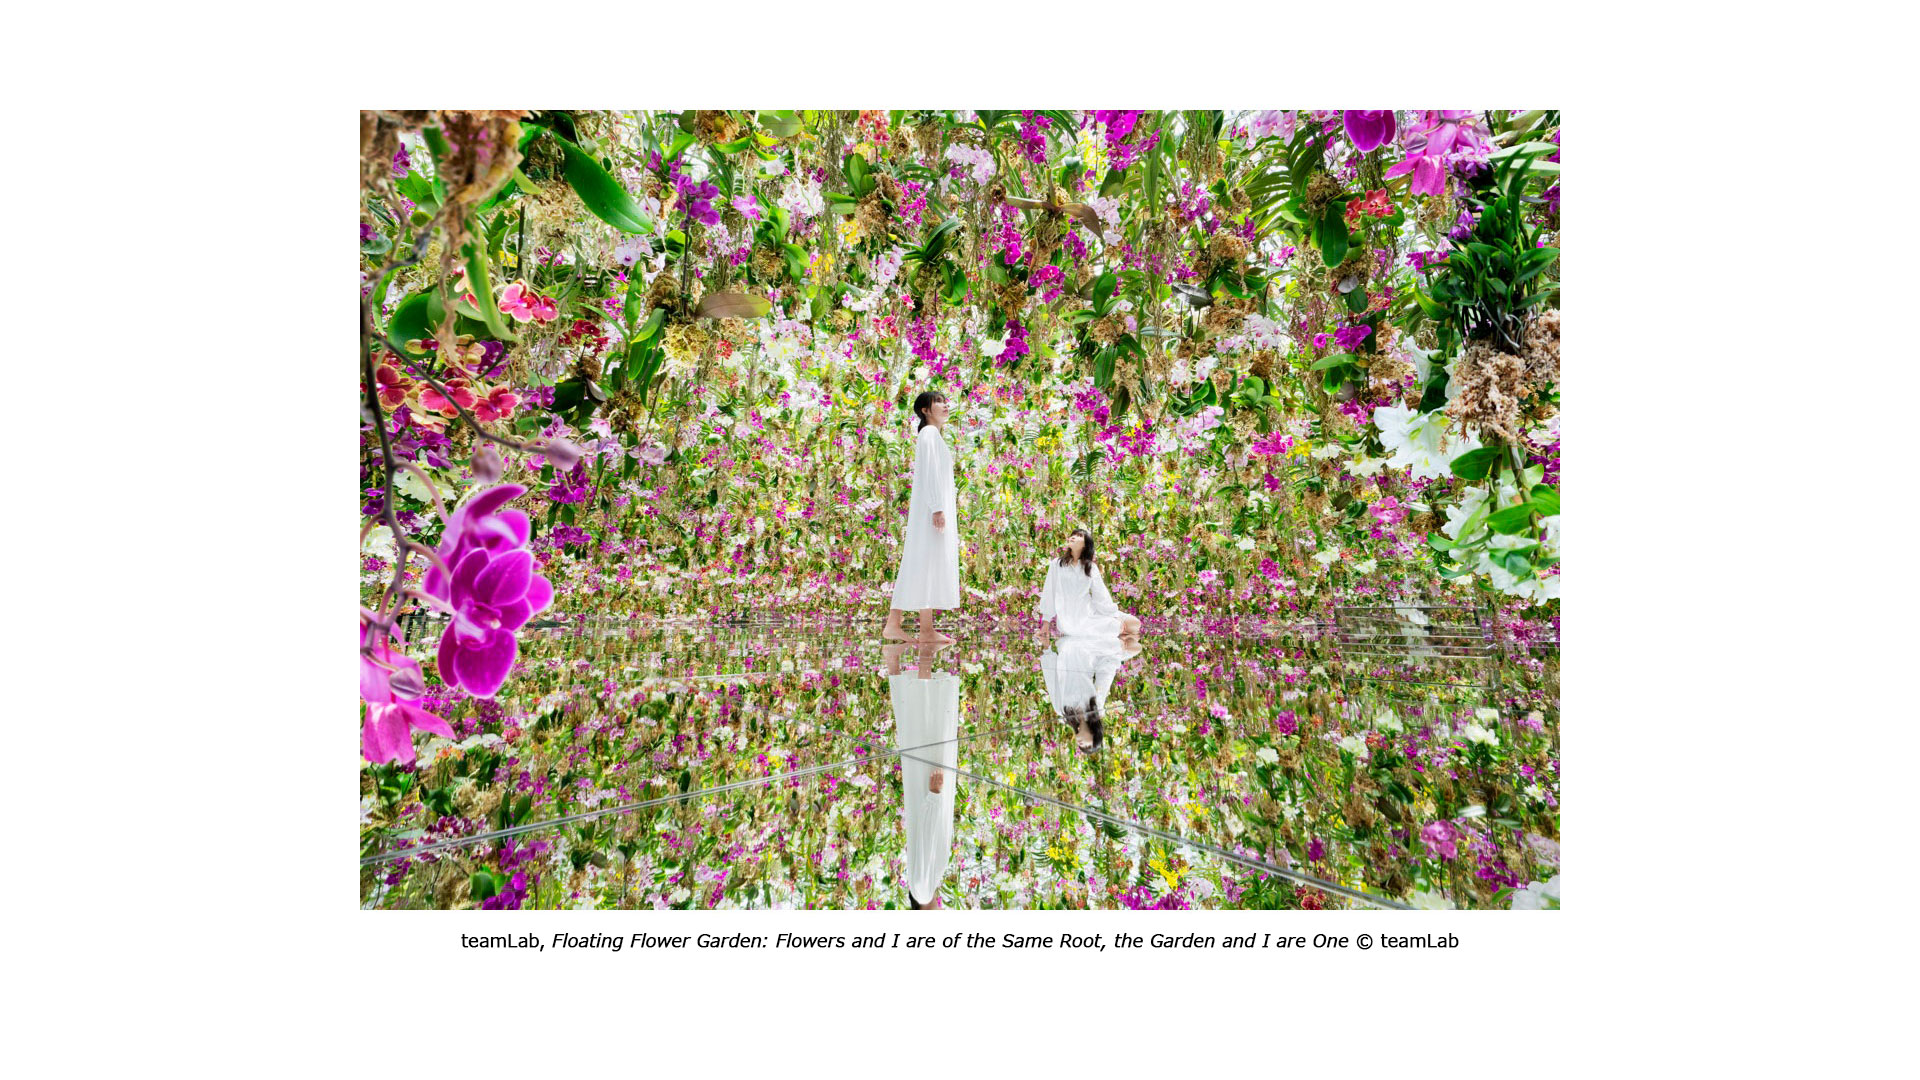 teamLab, Floating Flower Garden: Flowers and I are of the Same Root, the Garden and I are One